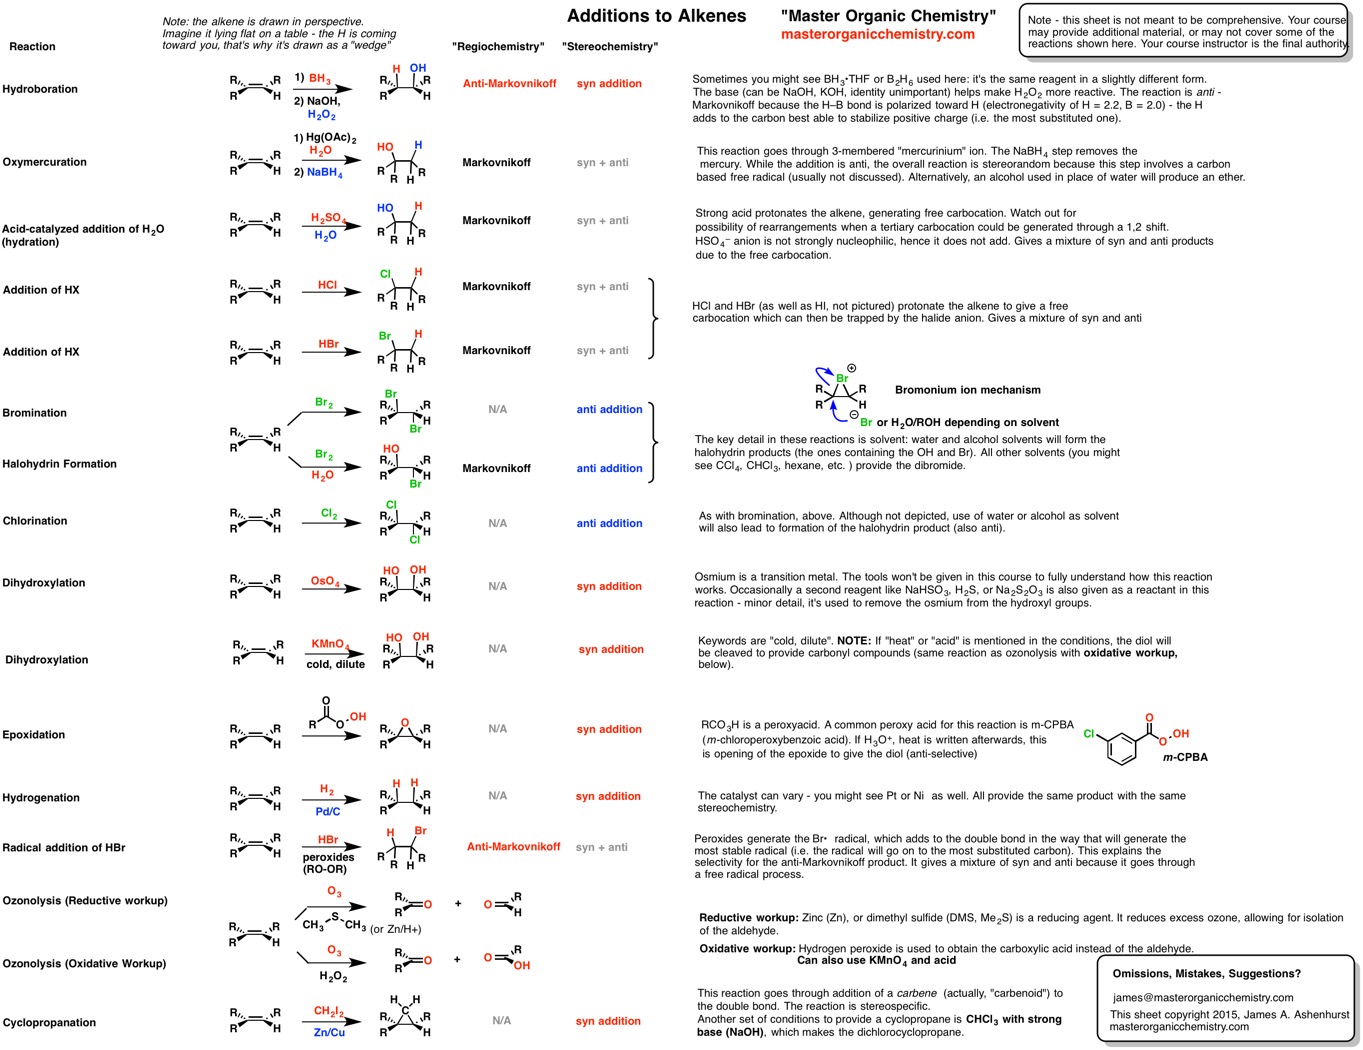 master organic chemistry reagent guide pdf free download